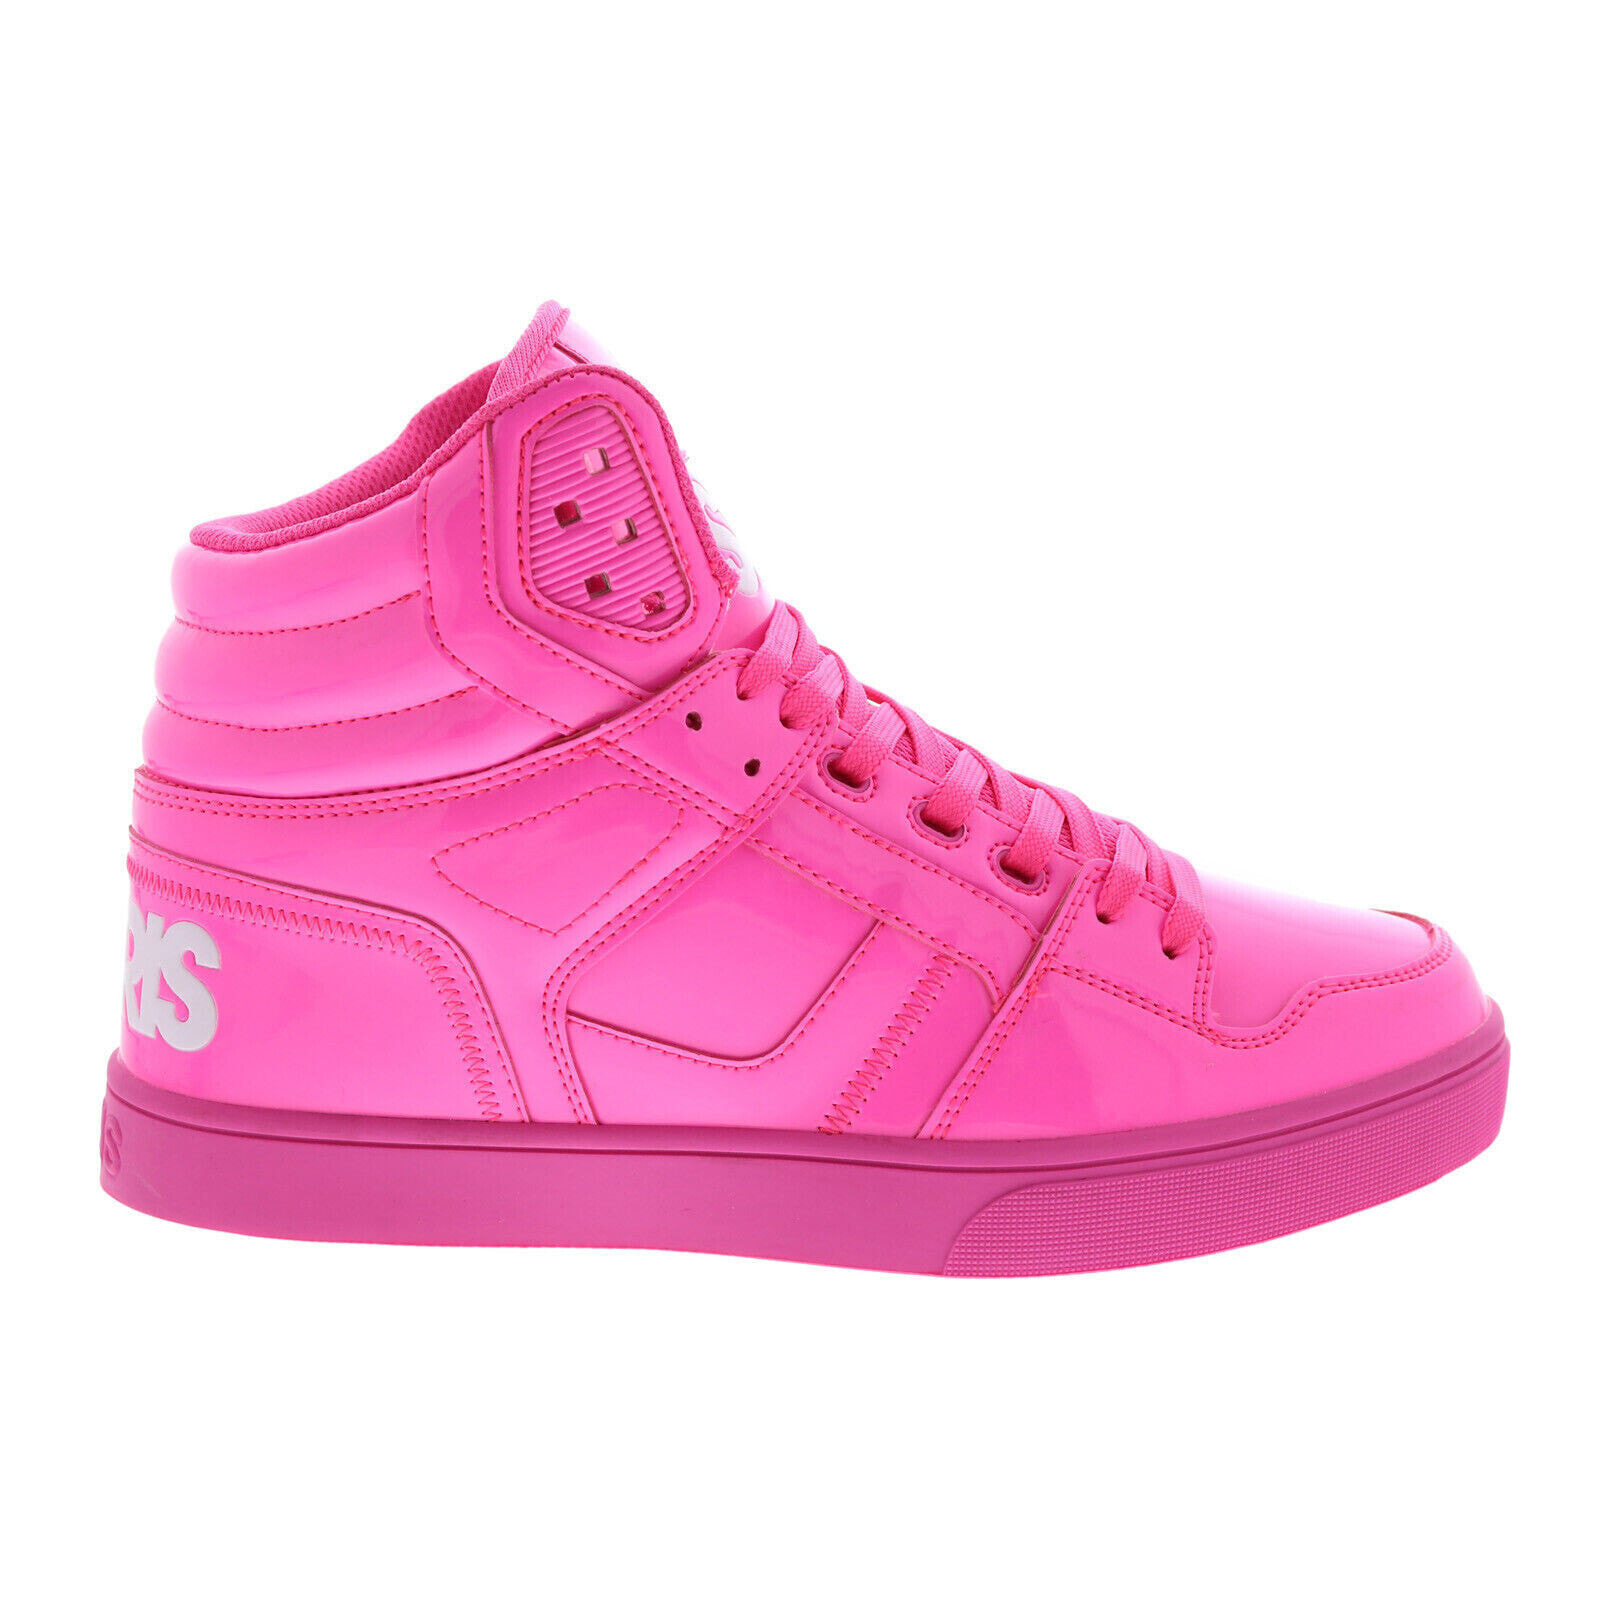 Osiris Clone 1322 1920 Mens Pink Synthetic Skate Inspired Sneakers Shoes